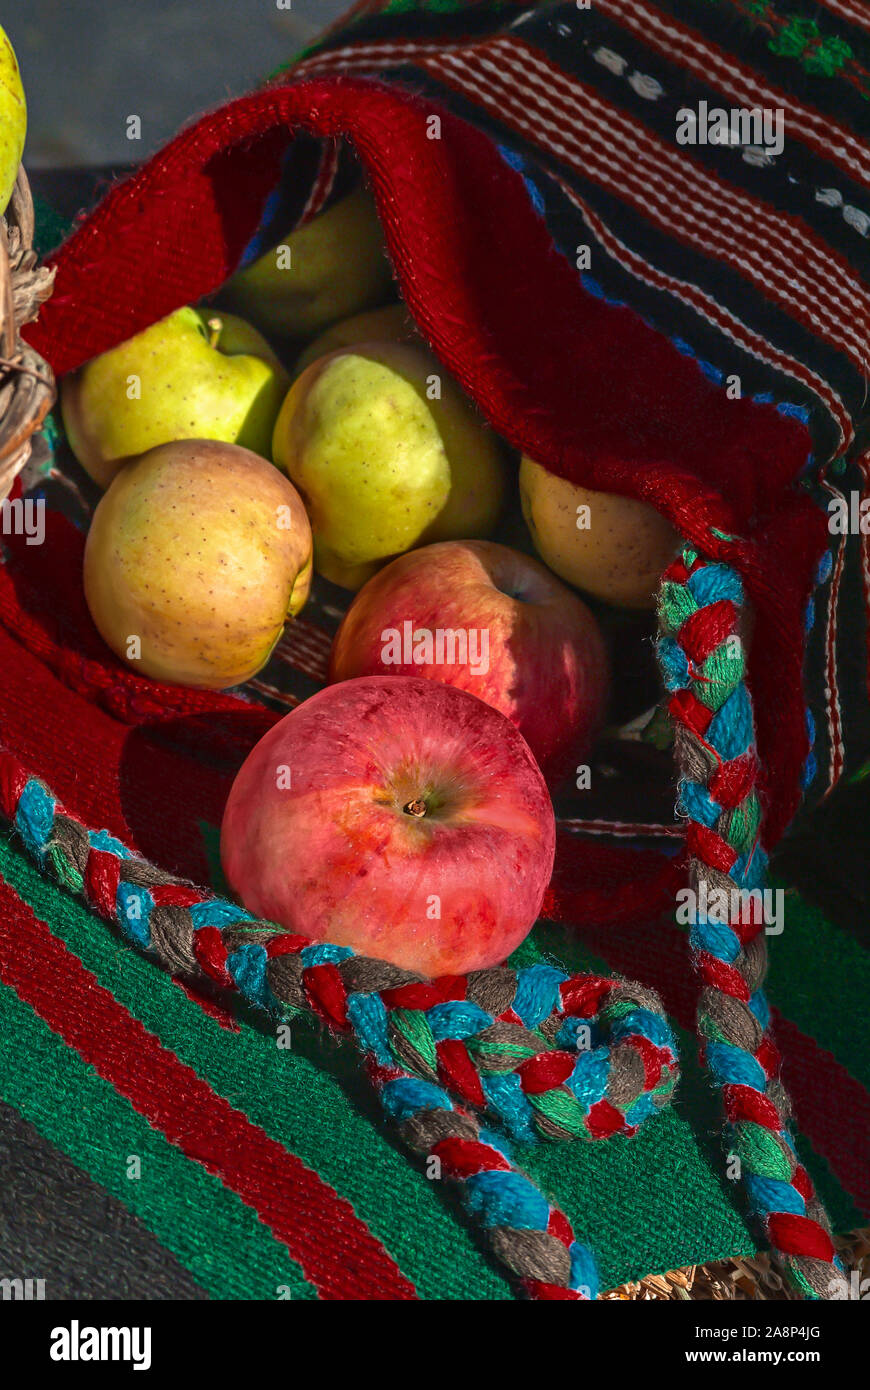 Apples in a bag; Stock Photo